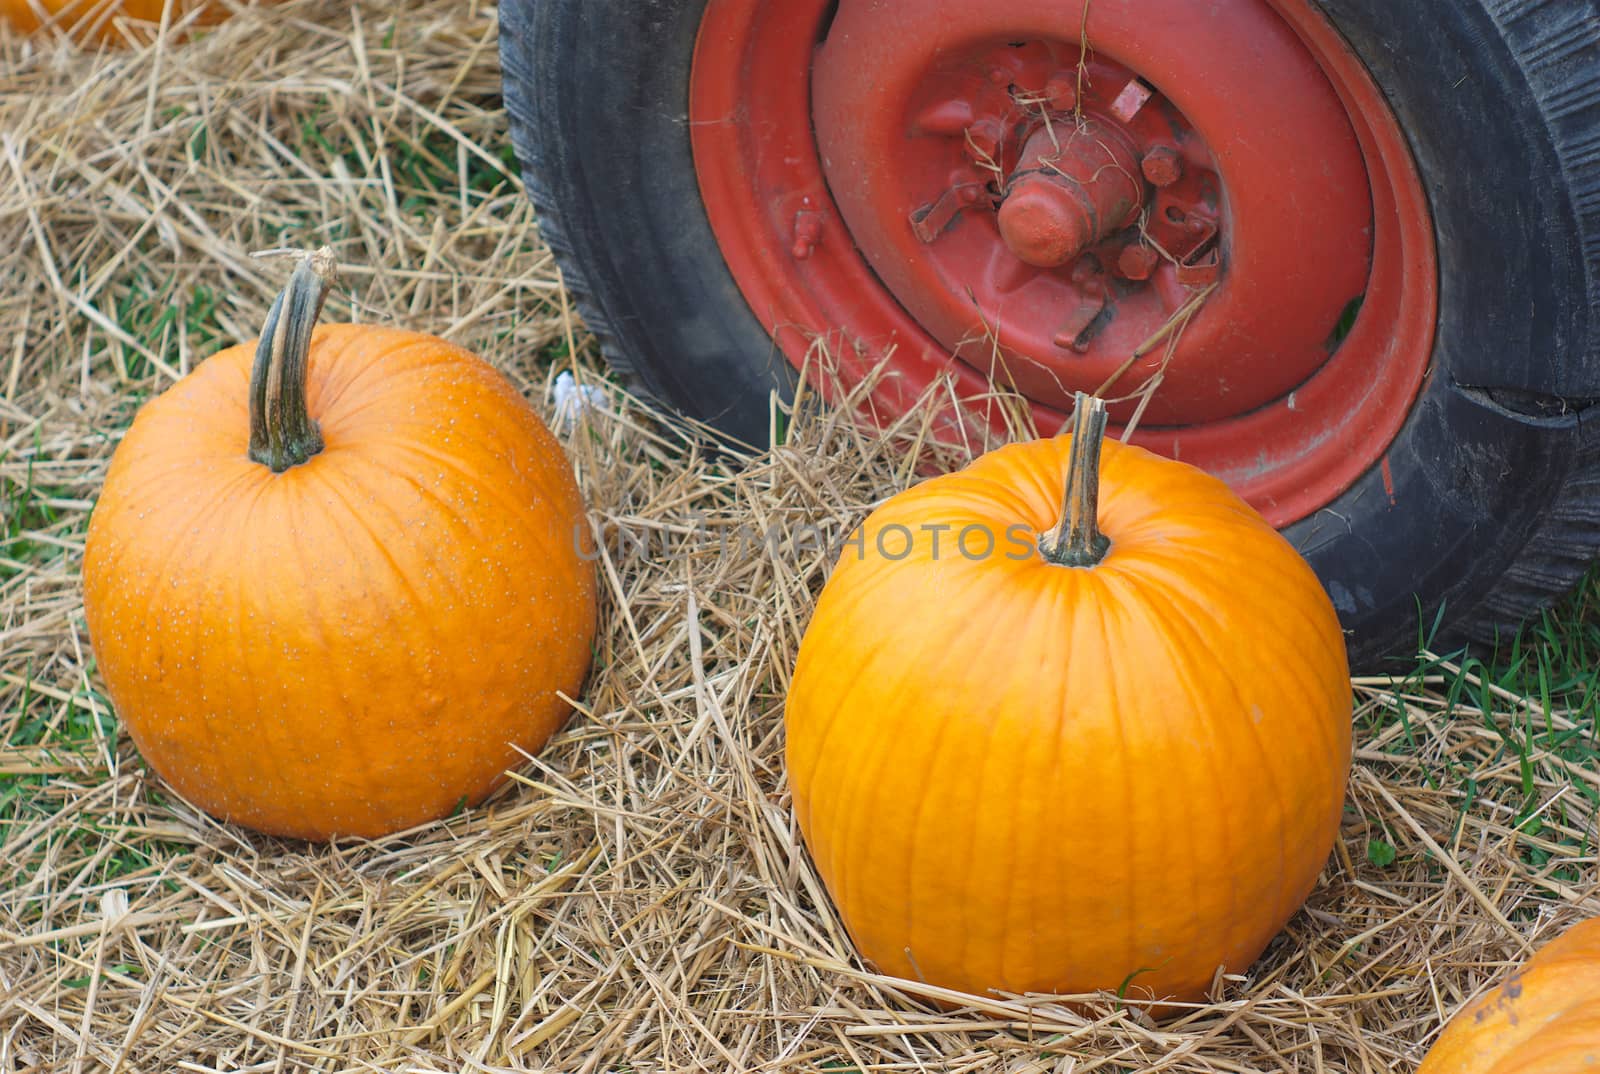 orange pumpkin with tractor wheel for thanksgiving or halloween by jacquesdurocher